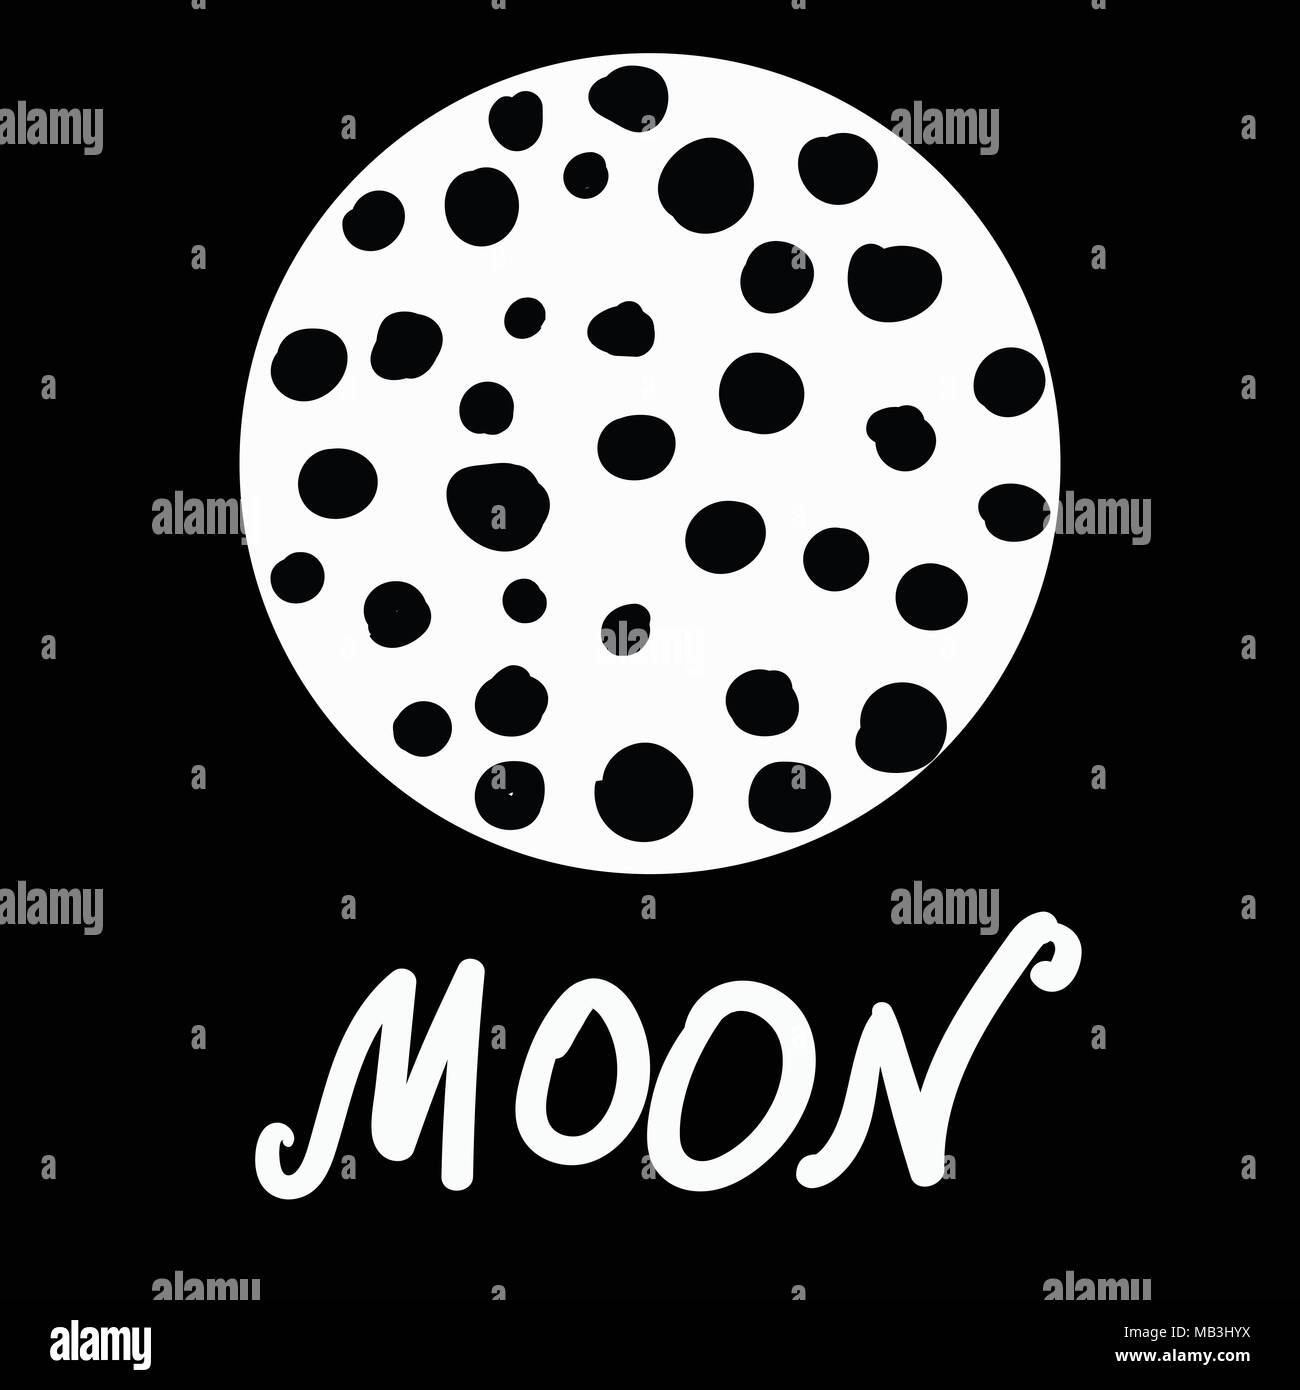 Stylized moon with craters vector and lettering on black Stock Vector